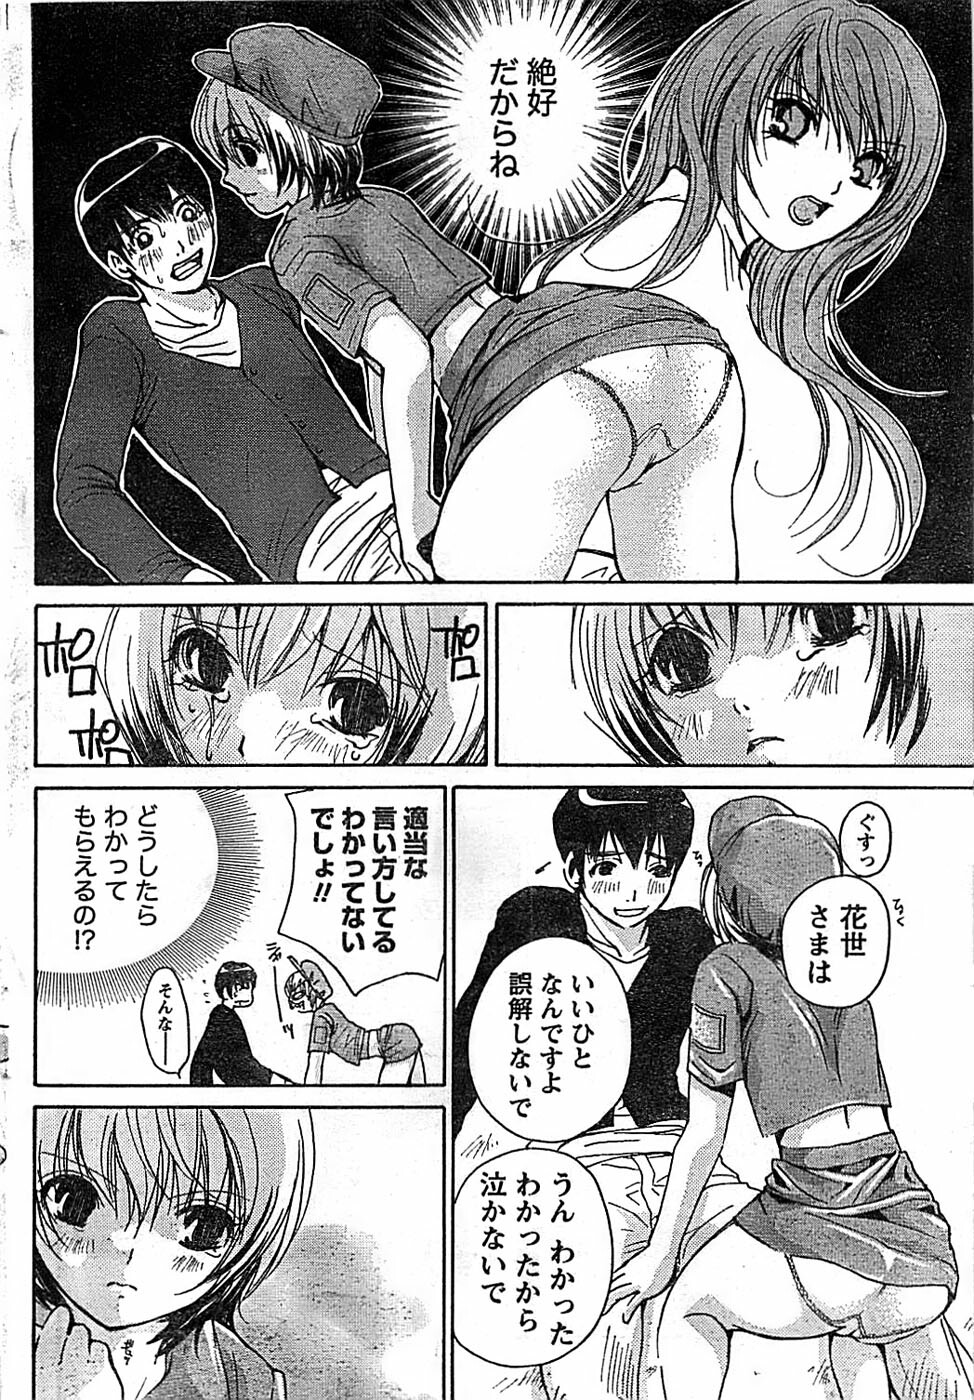 Doki! Special 2008-01 page 48 full